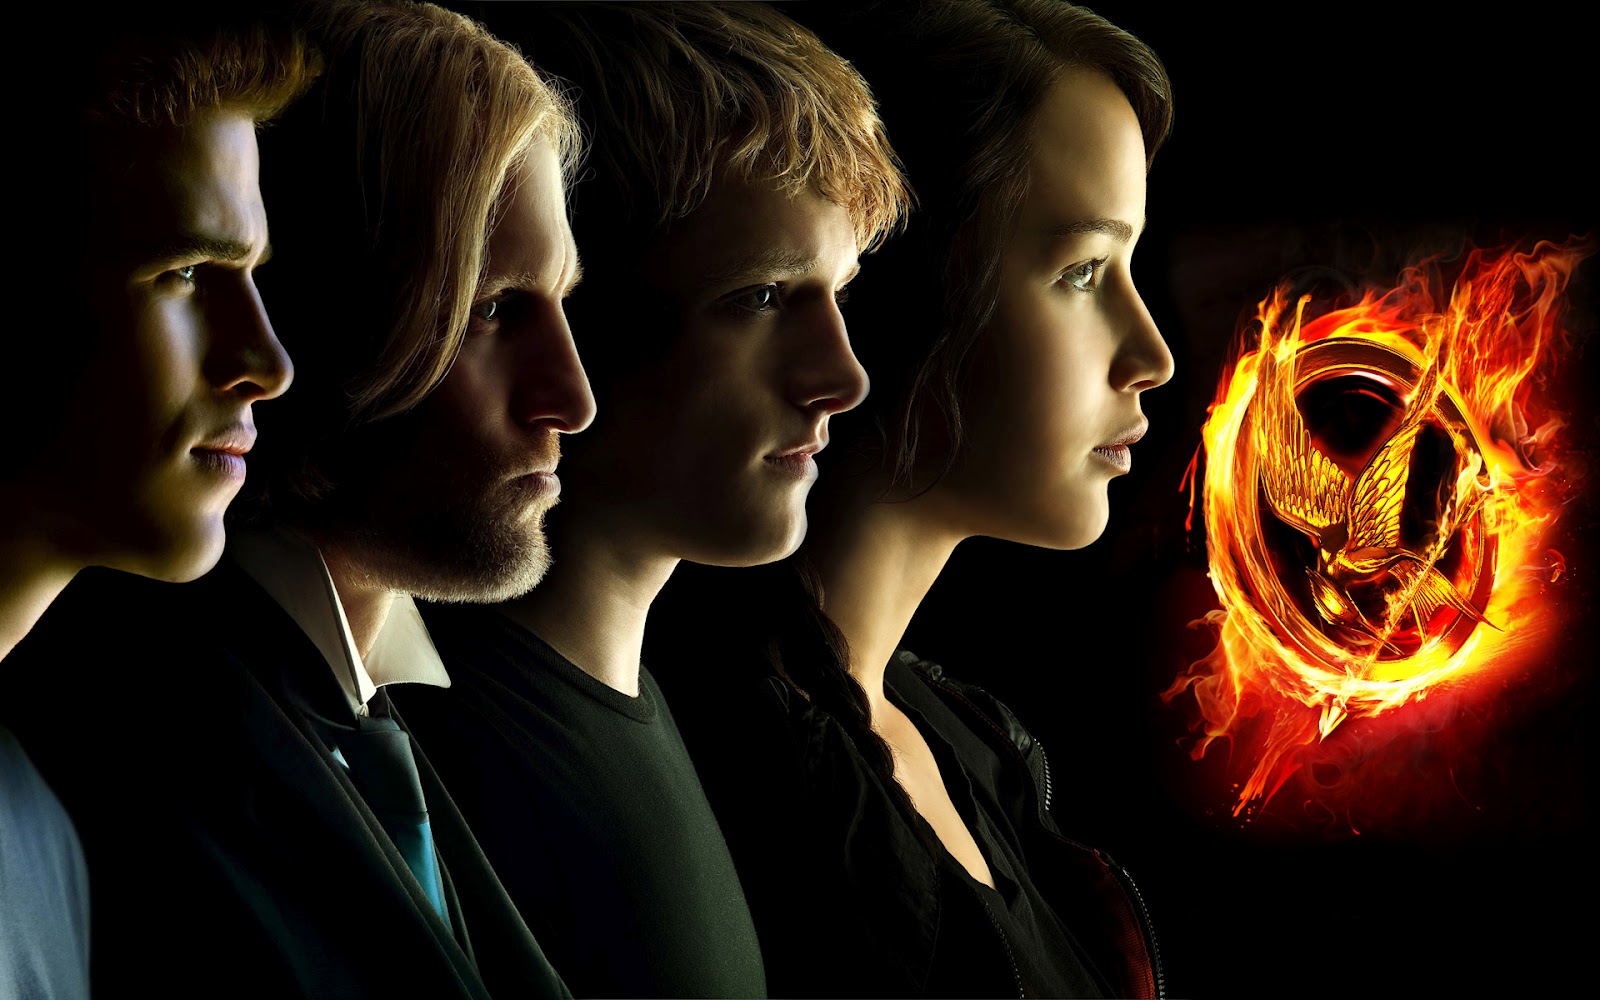 the-hunger-games-main-characters-wallpaper-1920x1200